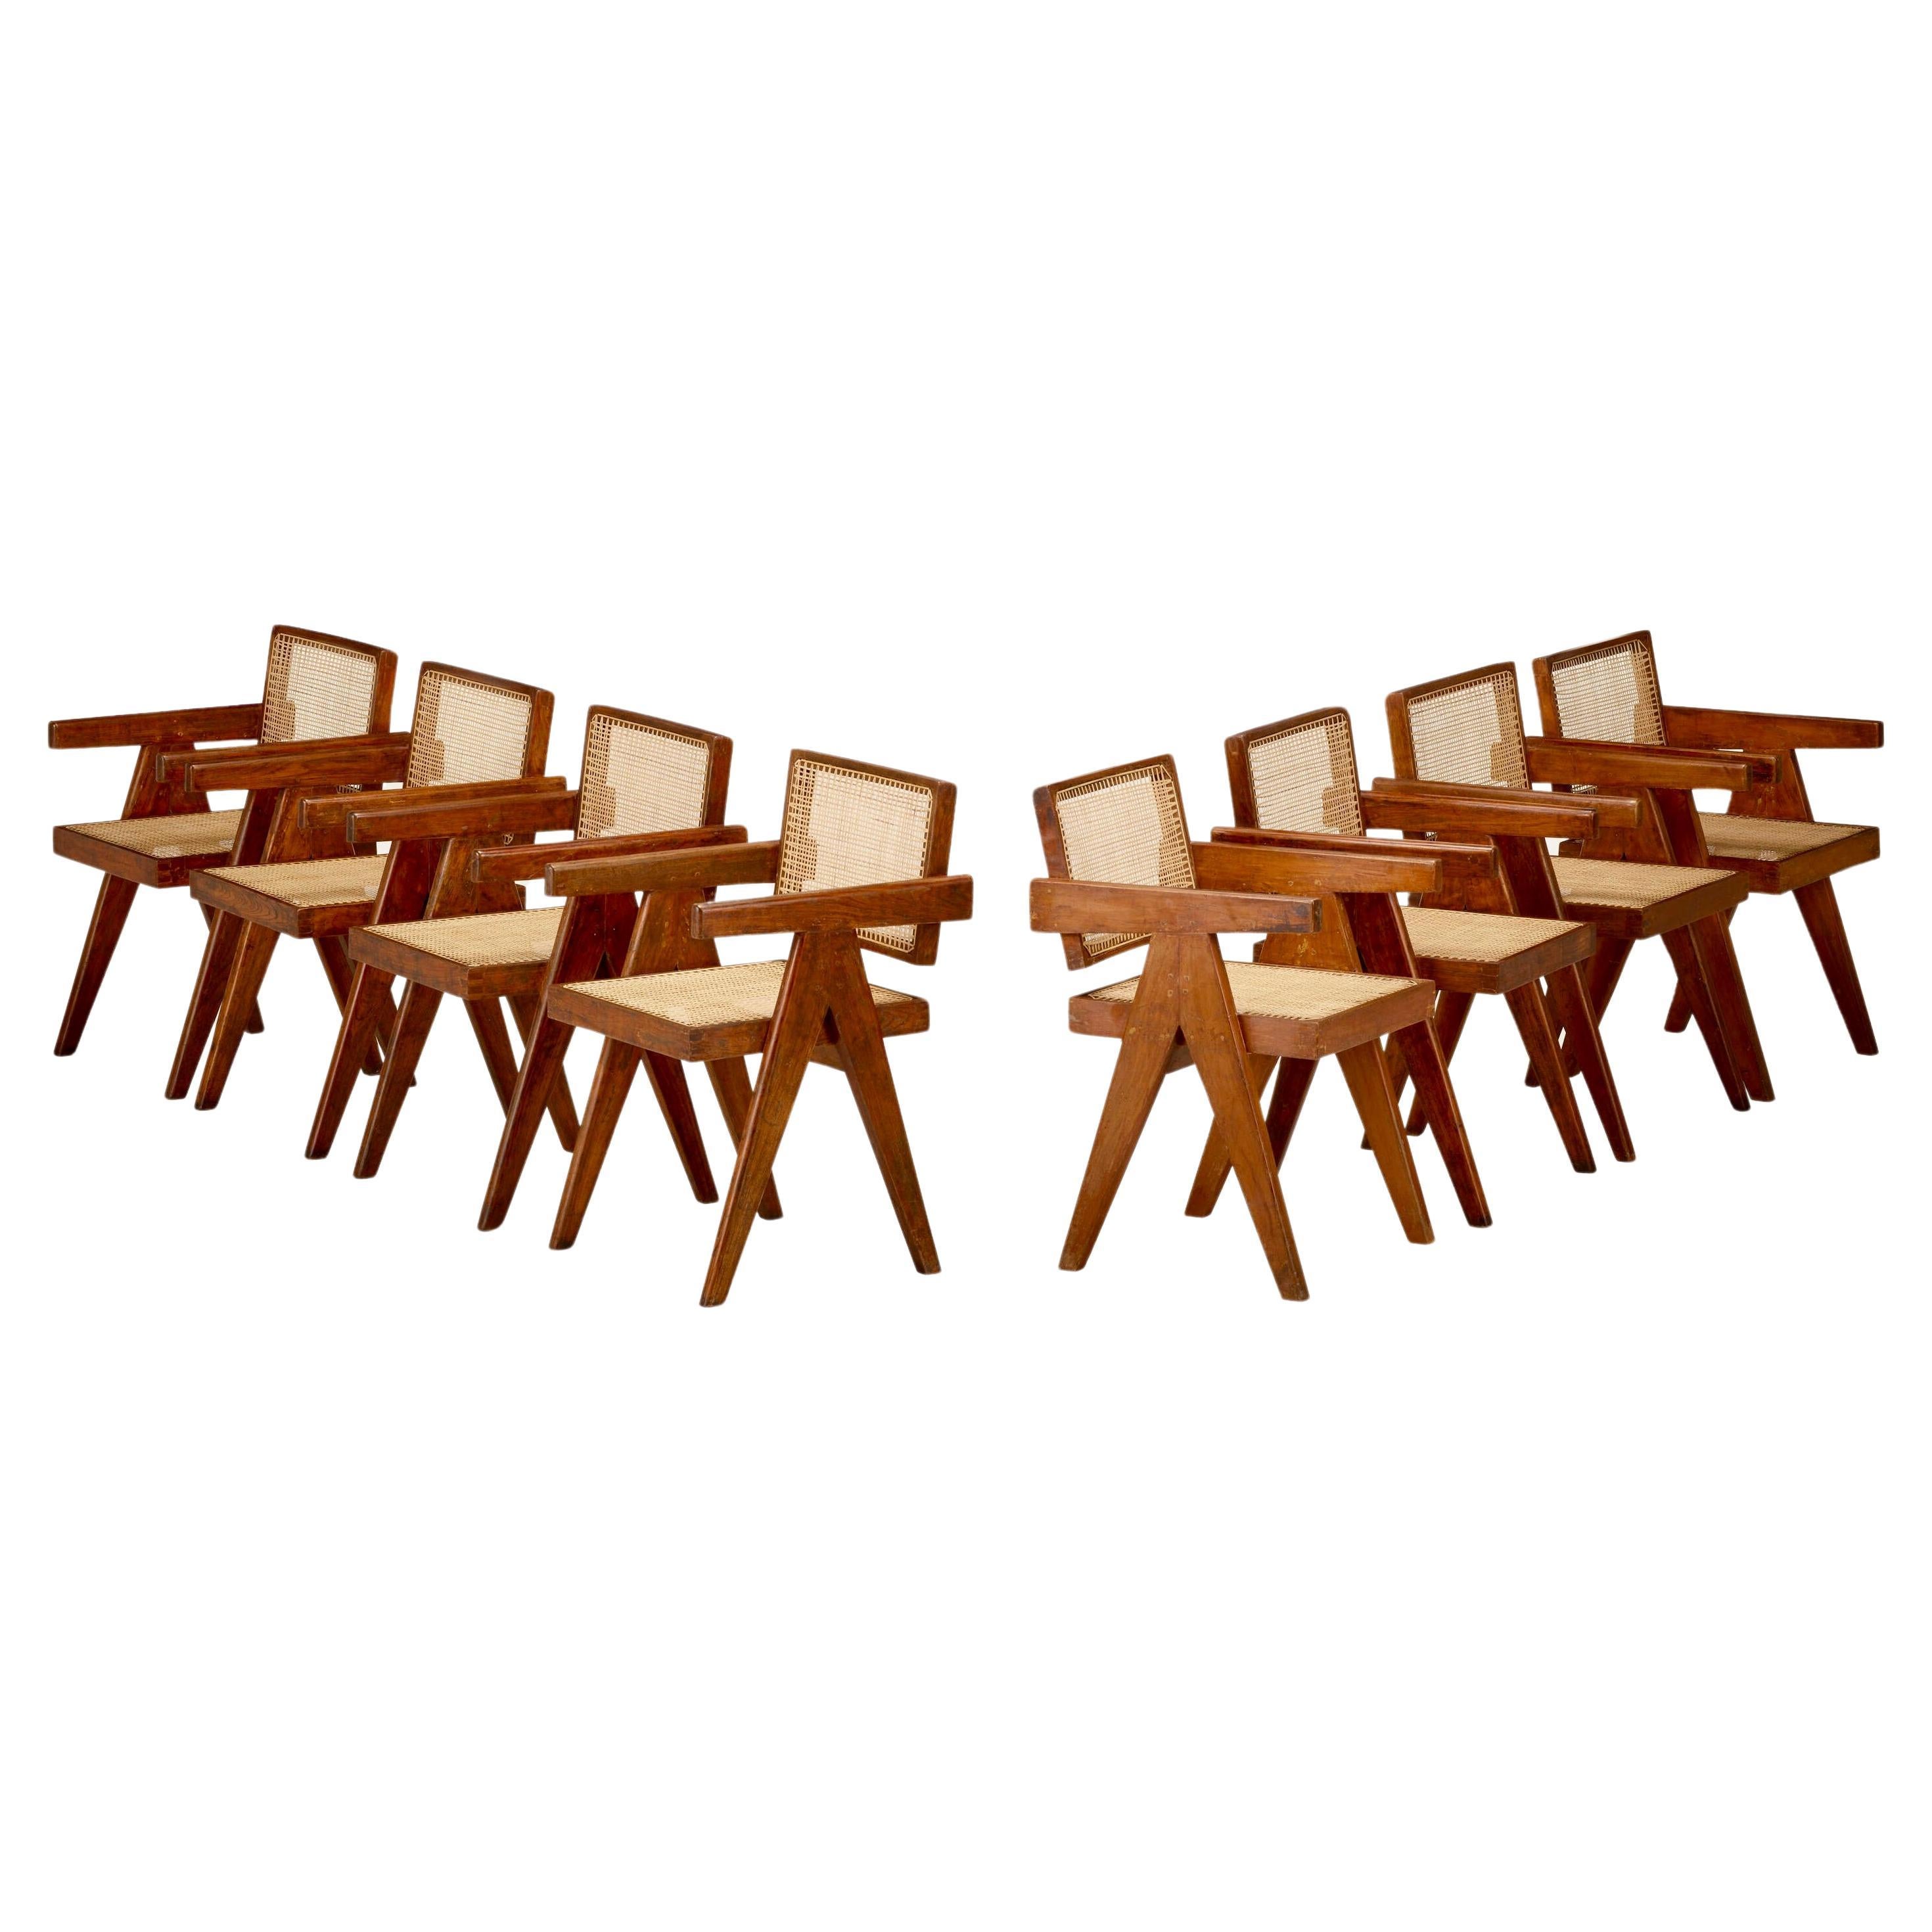 Modern Pierre Jeanneret Set of 8 Office Cane Chairs Ca. 1955-1960 from Chandigarh For Sale